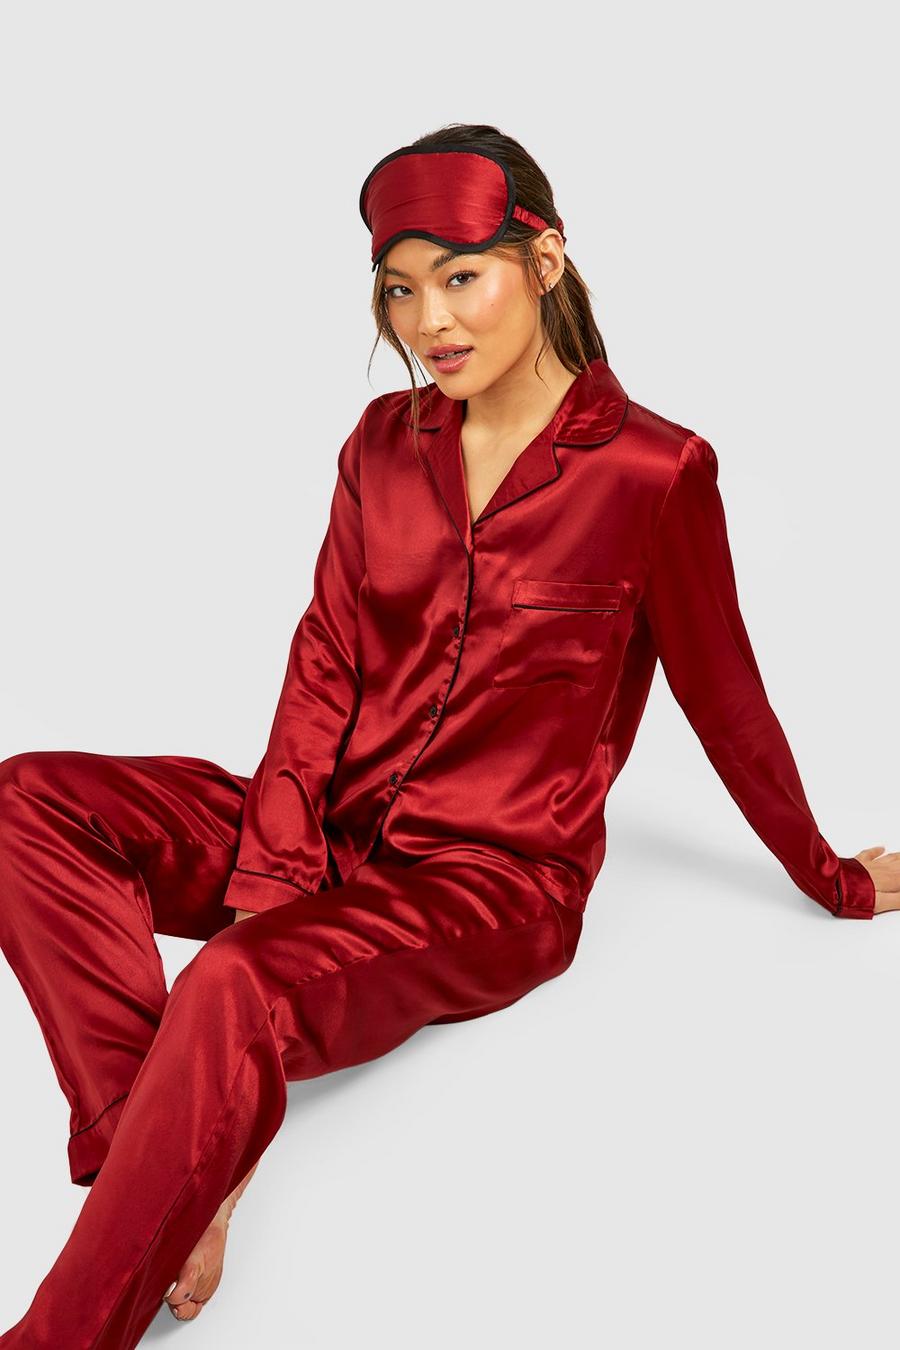 Red Pyjama Gift Set With Eye Mask And Scrunchie